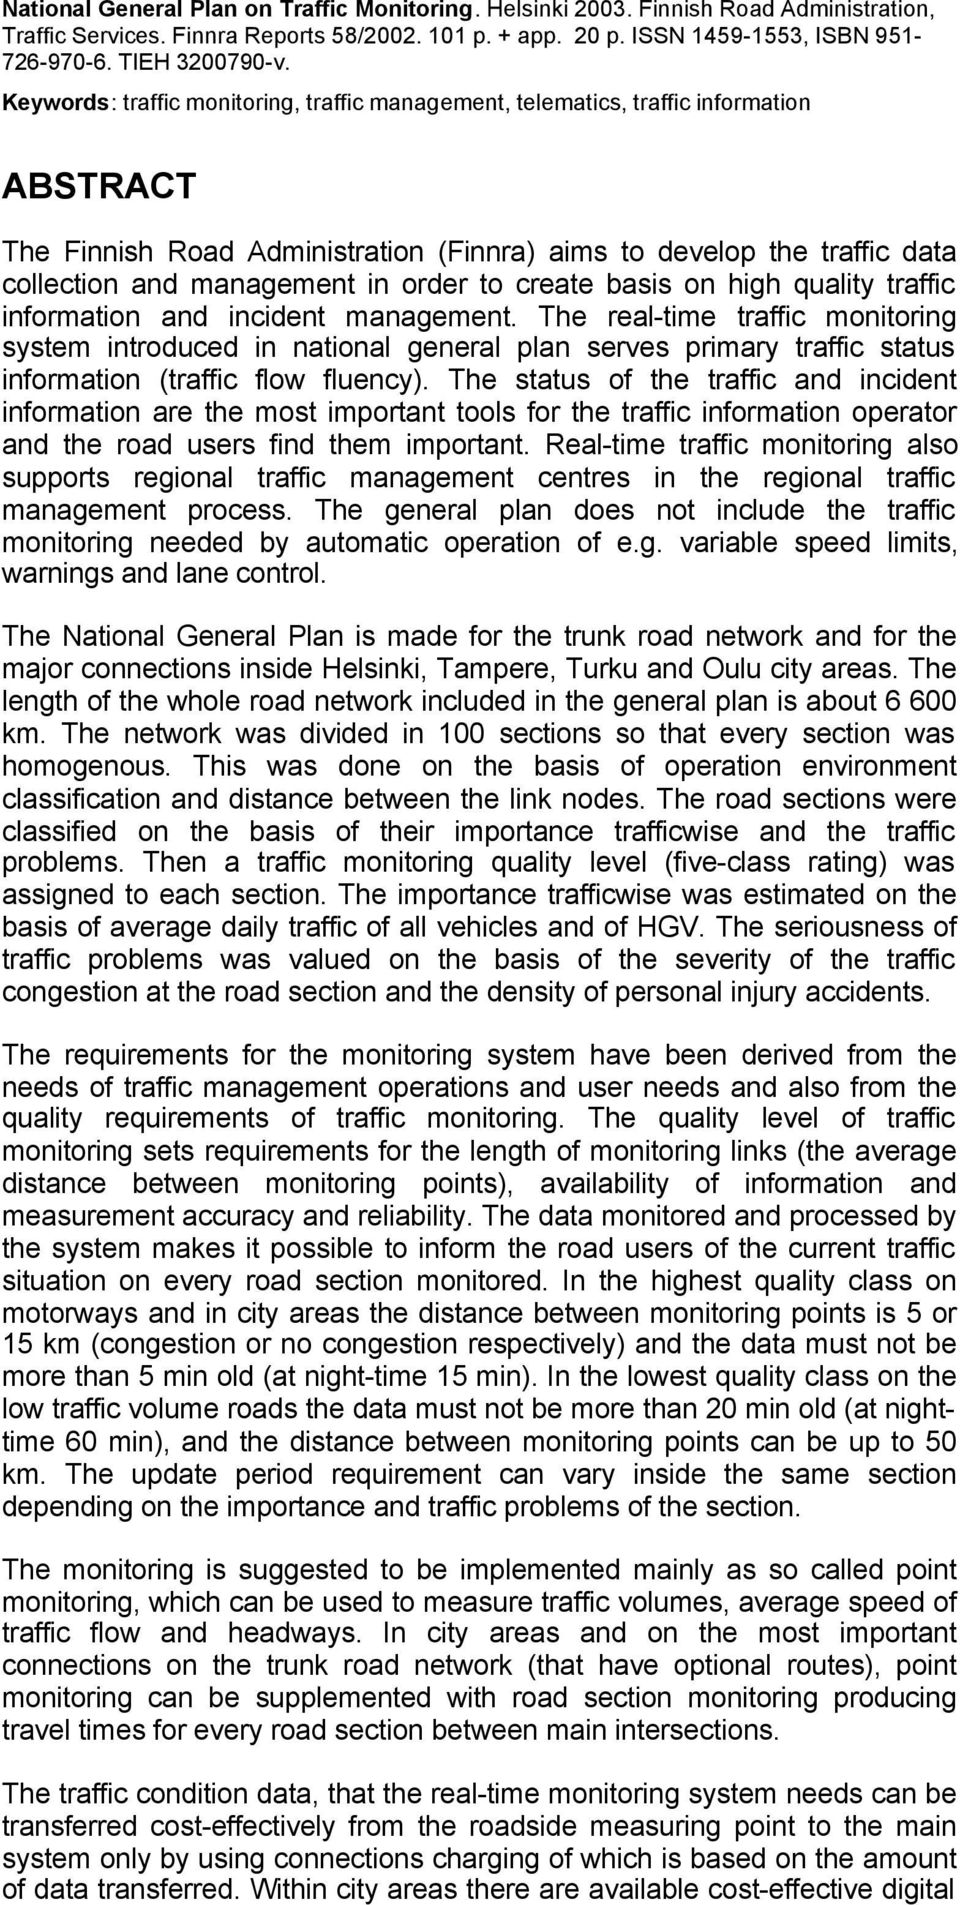 Keywords: traffic monitoring, traffic management, telematics, traffic information ABSTRACT The Finnish Road Administration (Finnra) aims to develop the traffic data collection and management in order